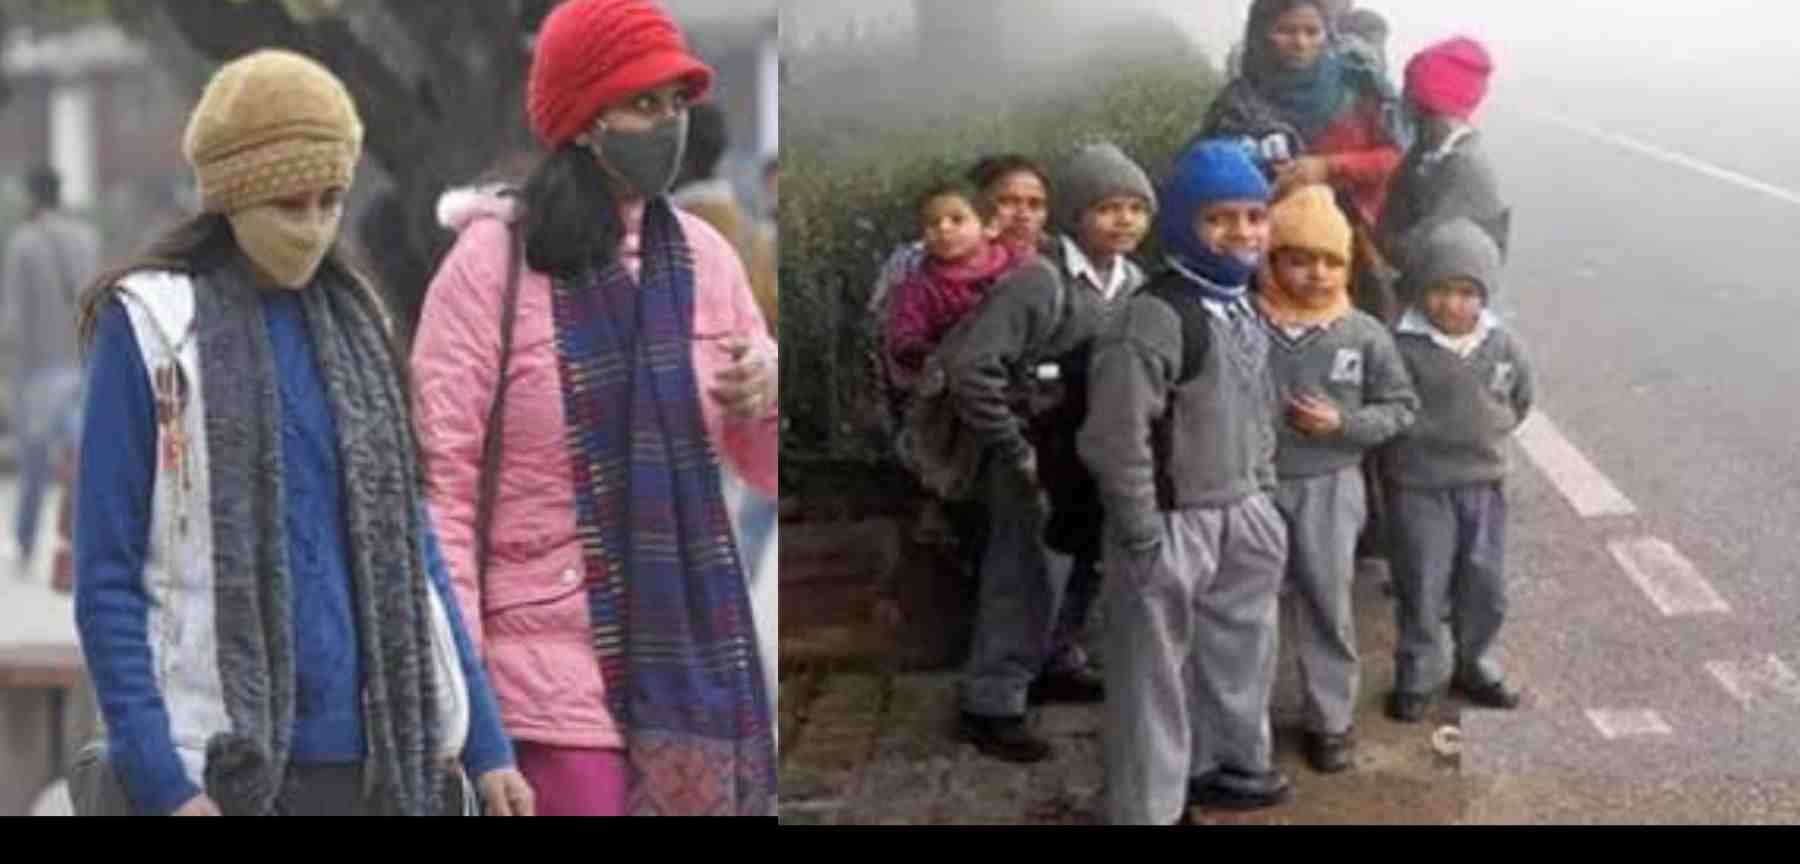 Uttarakhand News: Udham Singh Nagar District School will be closed on 28 December due to cold weather